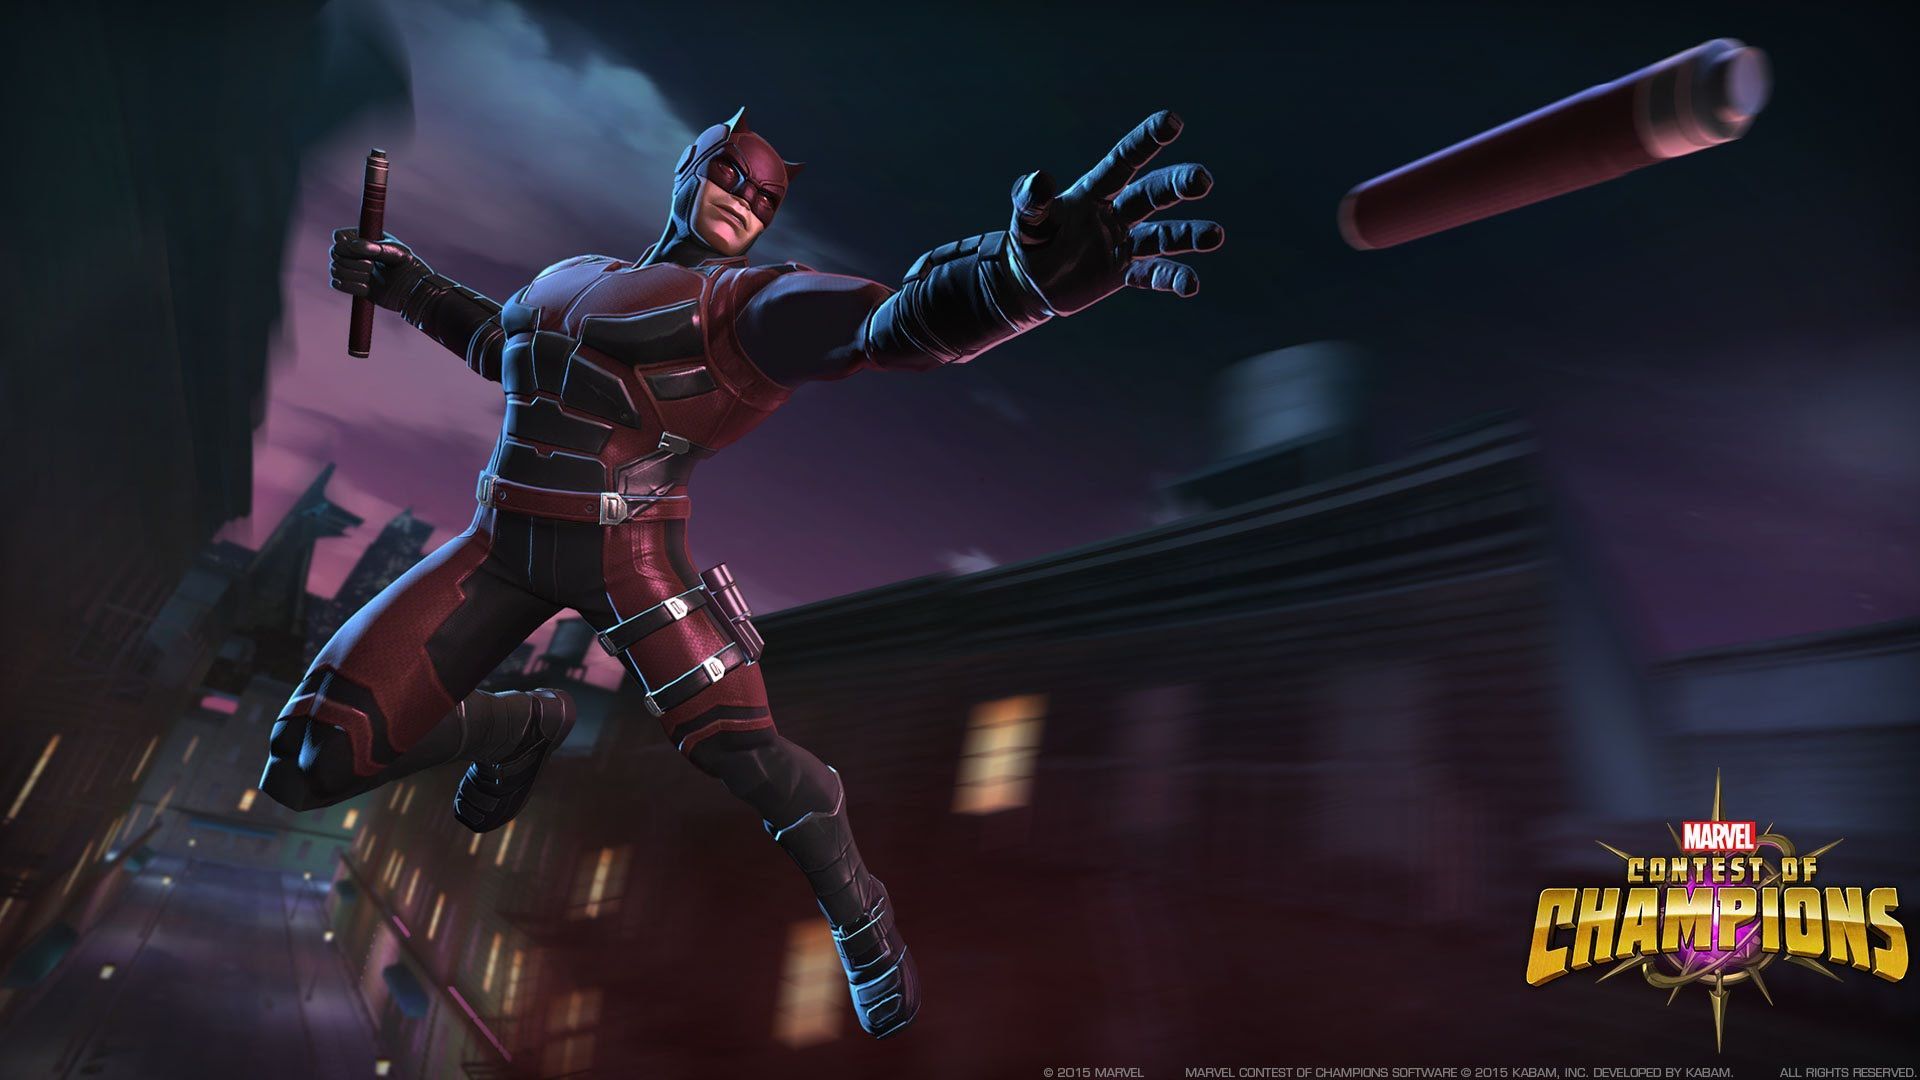 Marvel's Daredevil” Leaps from Netflix to “Marvel Contest of Champions”. Contest of champions, Marvel champions, Marvel daredevil